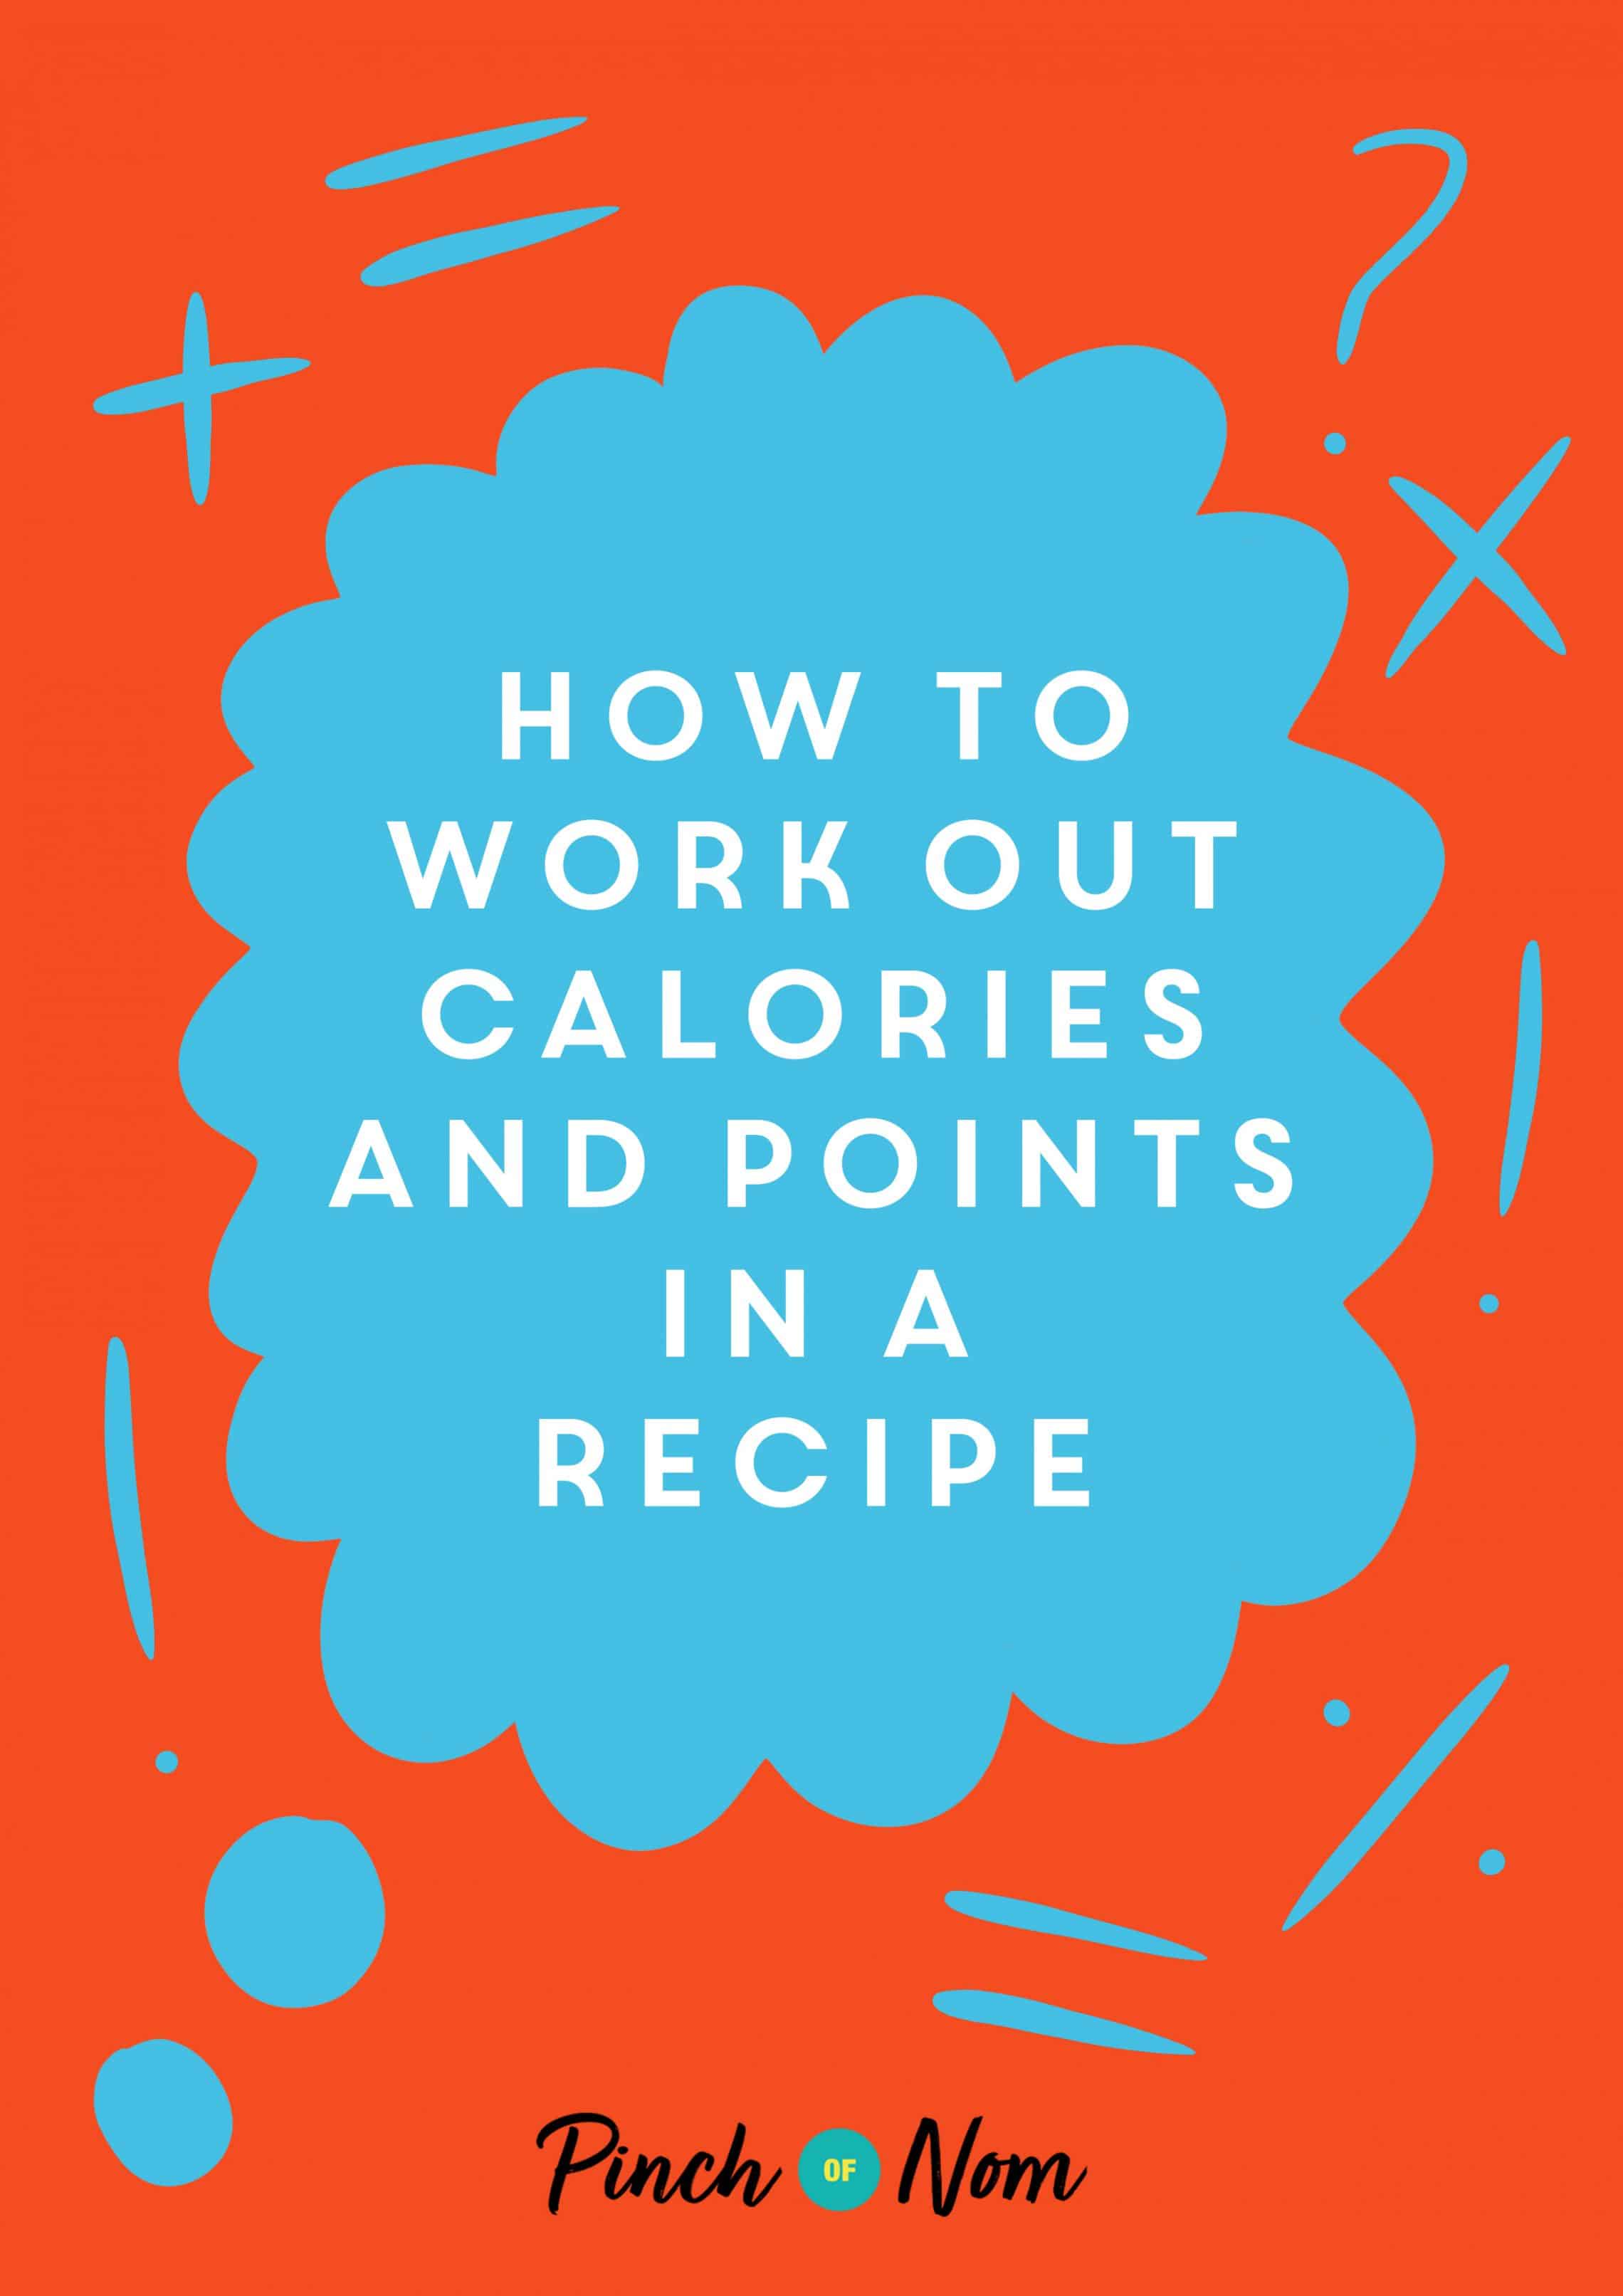 How to work out calories and points in a recipe